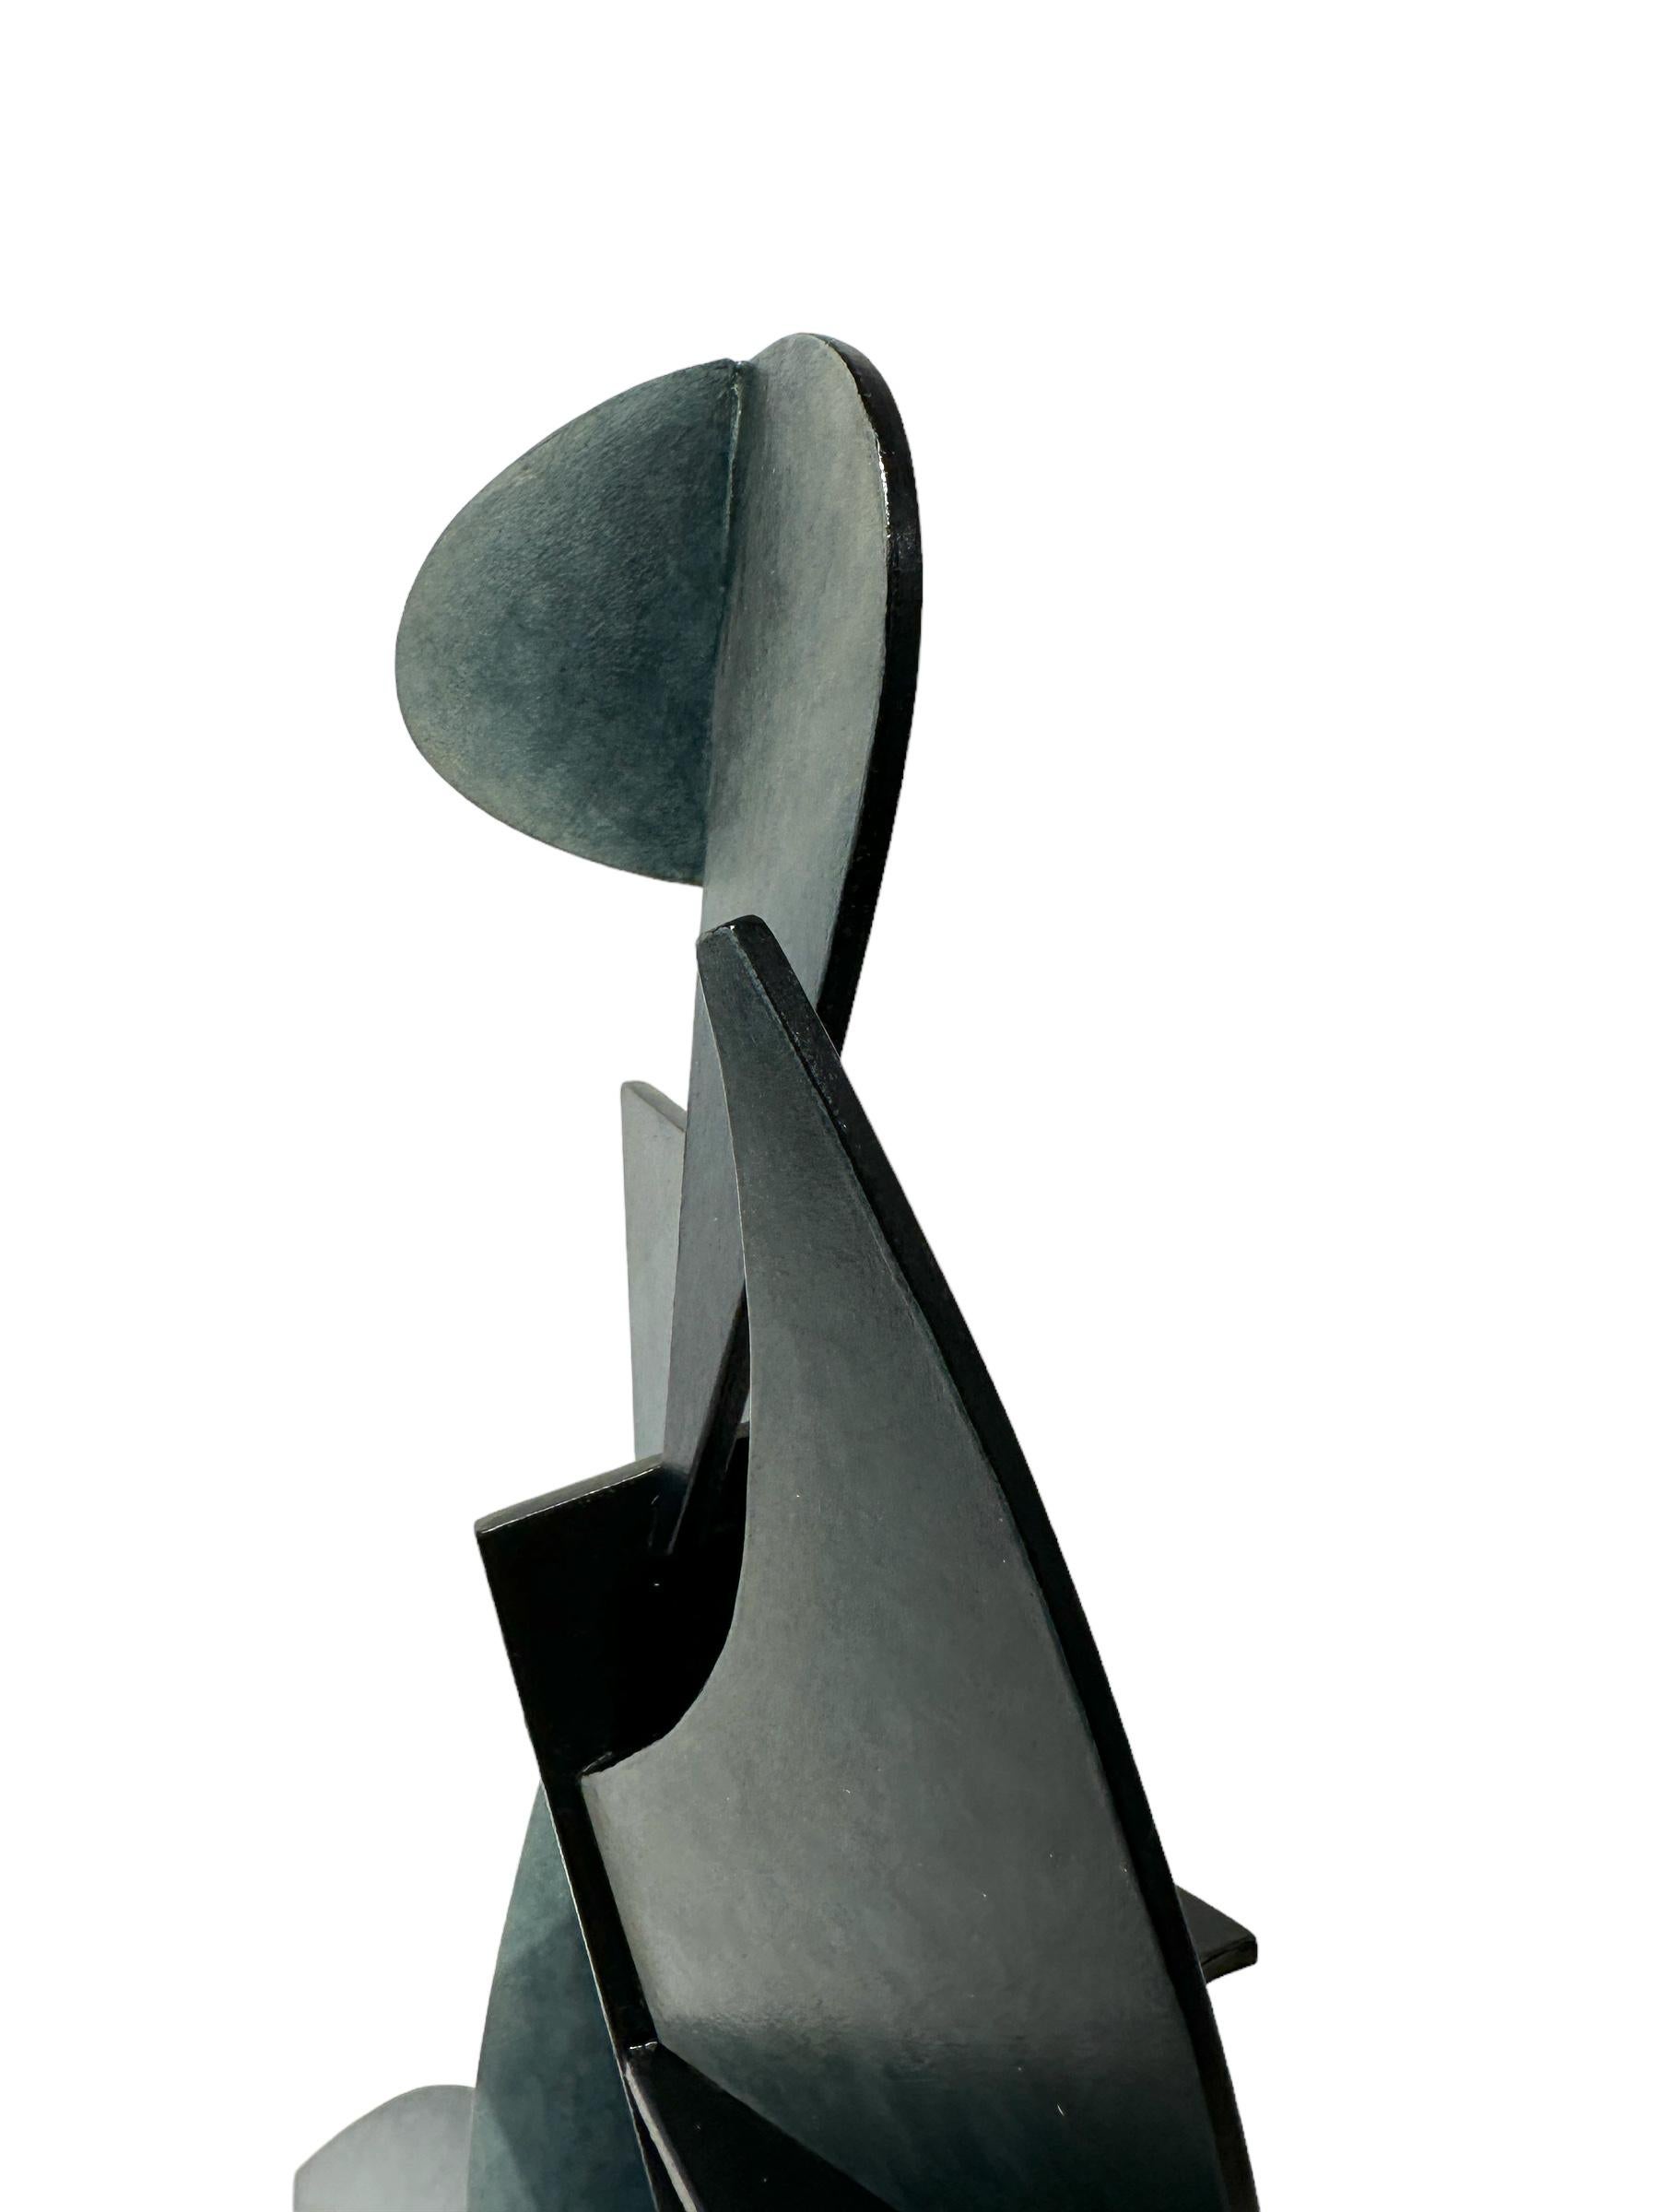 Spirit - Abstract Geometric Form, Hand Painted, Welded Steel Sculpture  For Sale 5